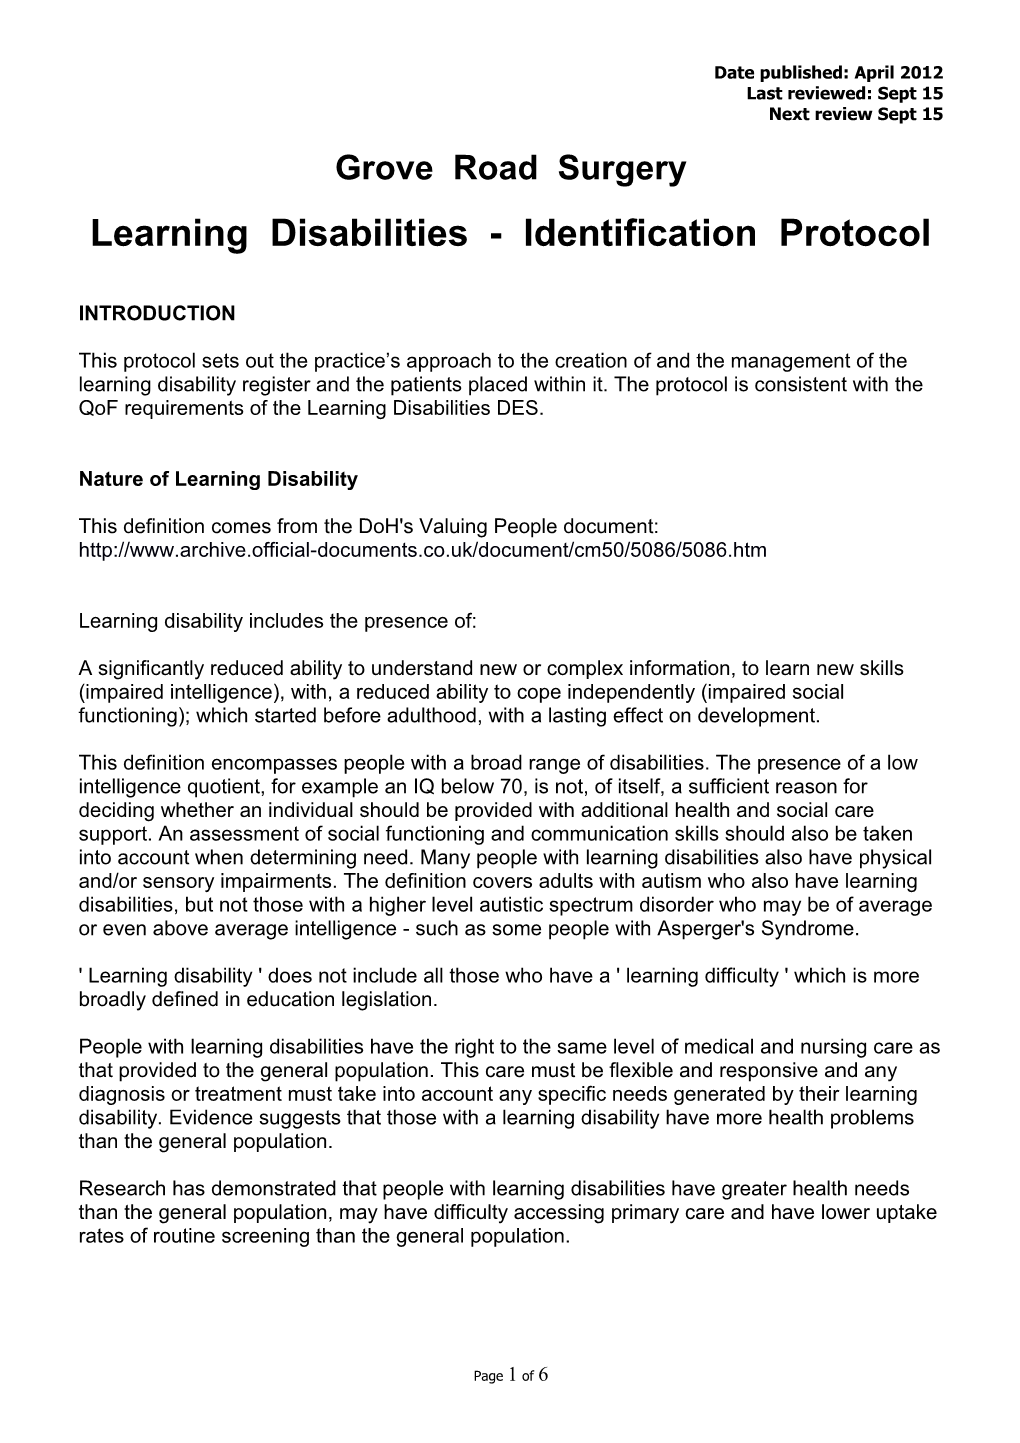 Learning Disabilities - Identification Protocol